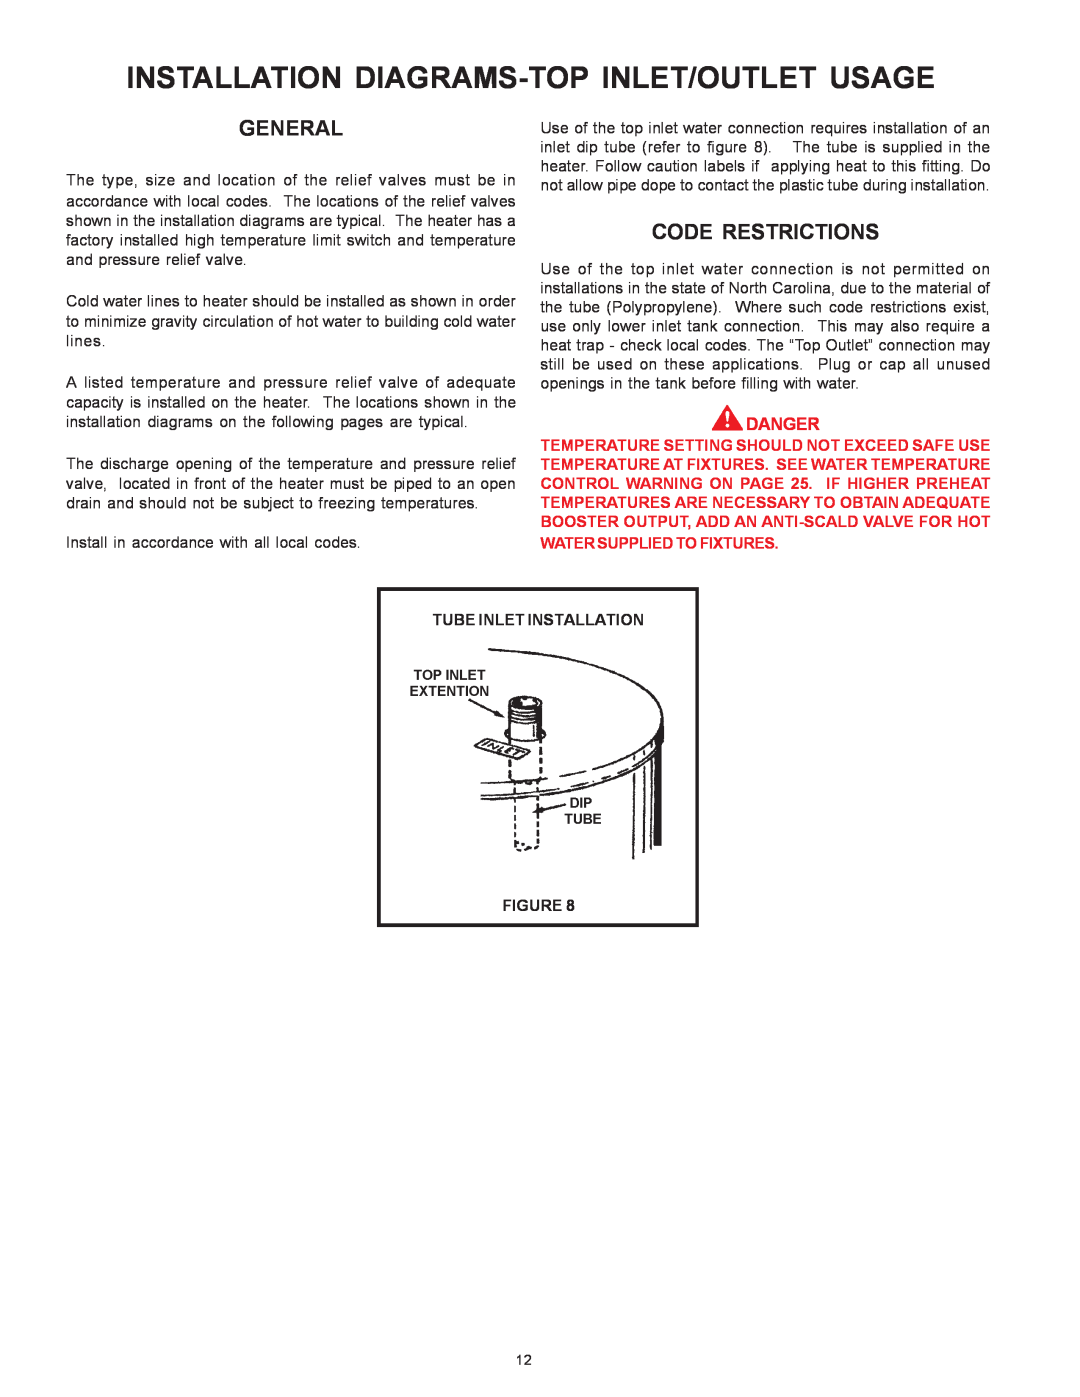 A.O. Smith BTN 120 THRU 400/A Series Installation Diagrams-Top Inlet/Outlet Usage, General, Code Restrictions, Danger 